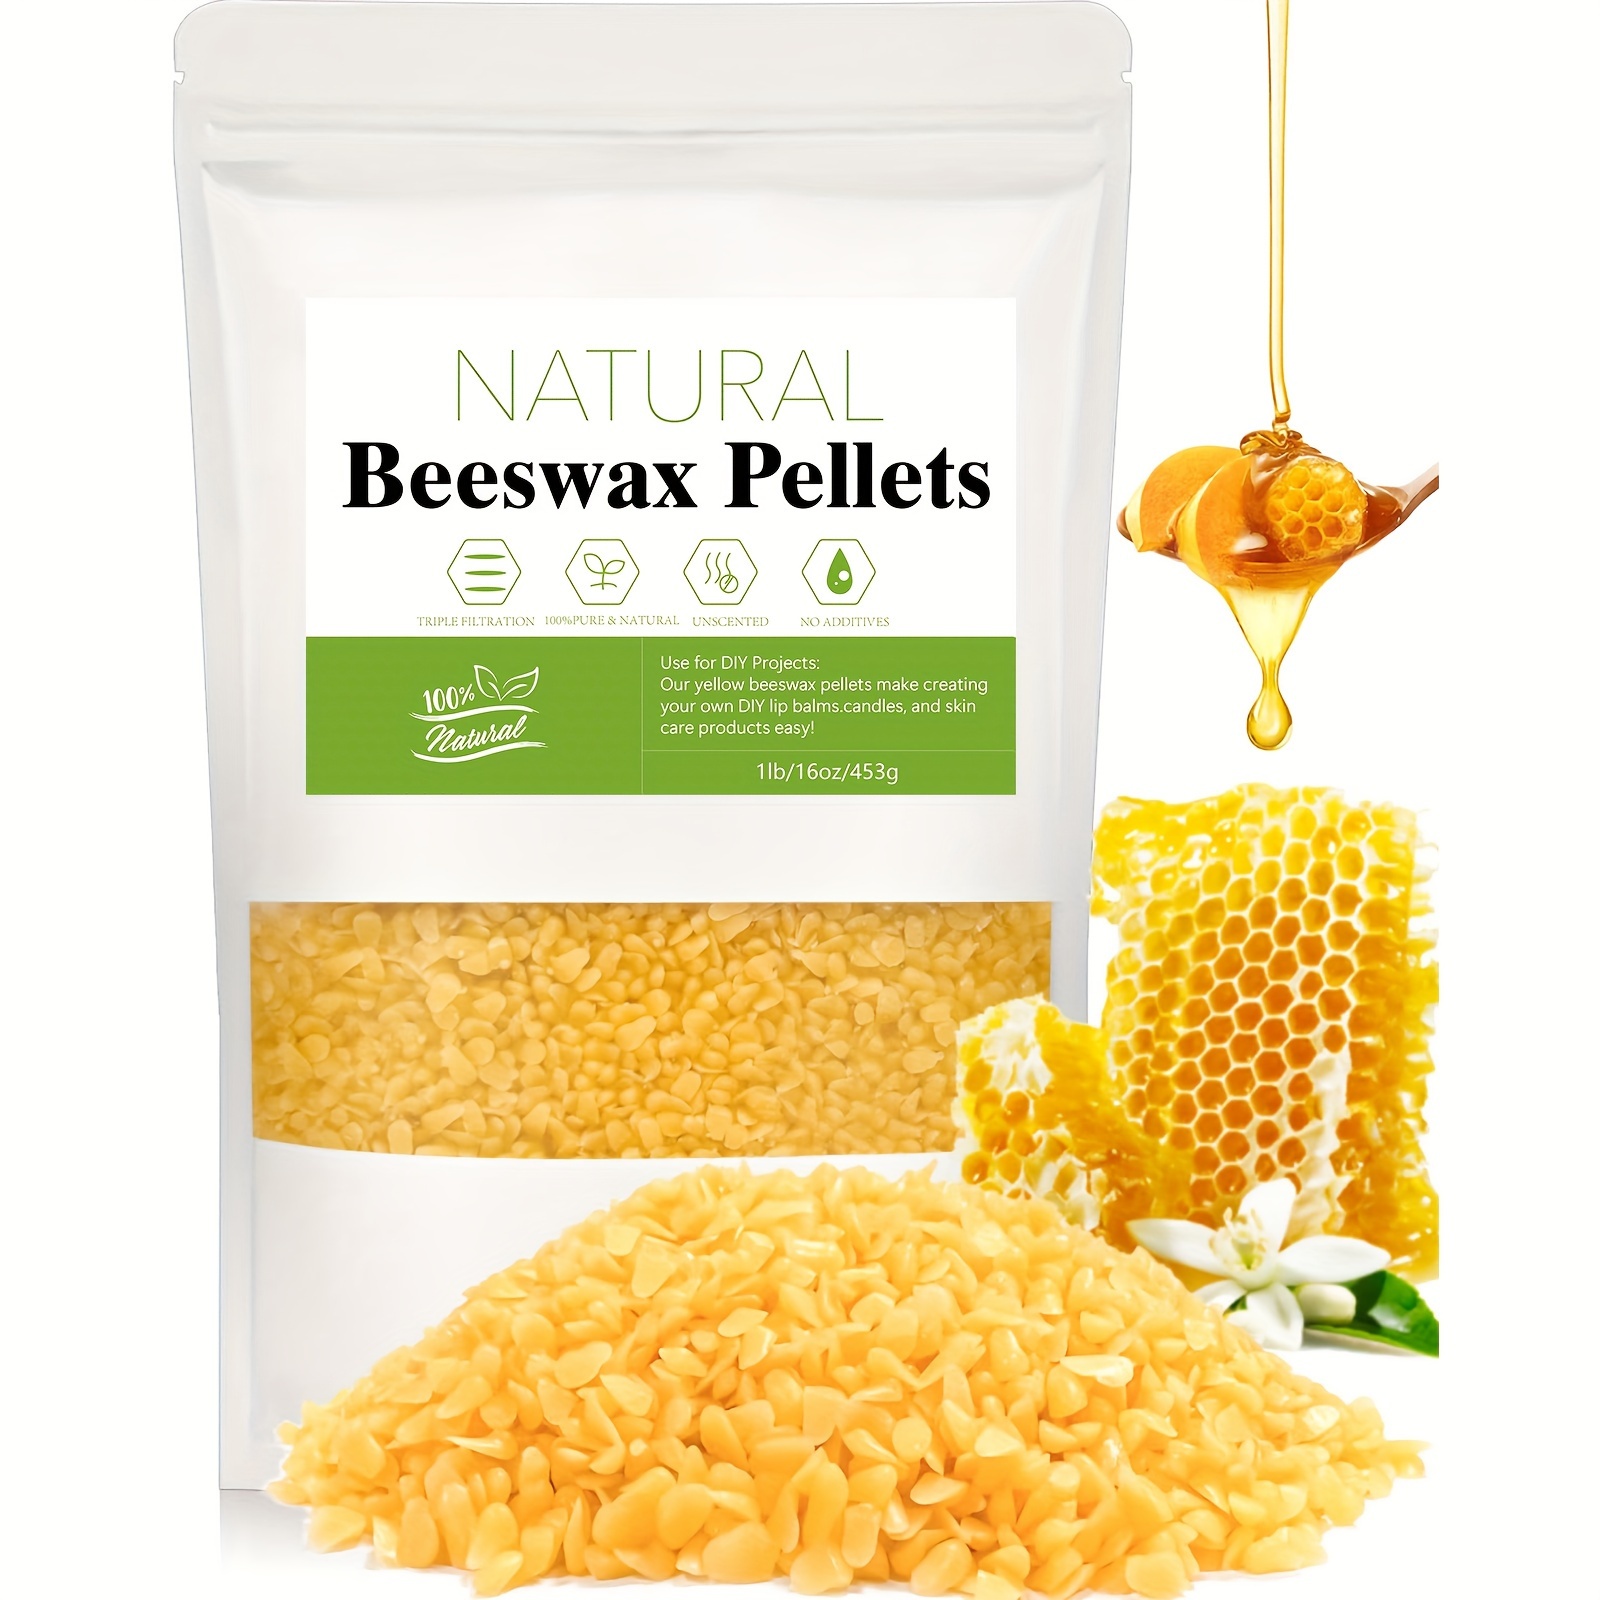 Beeswax pastilles for DIY gifts